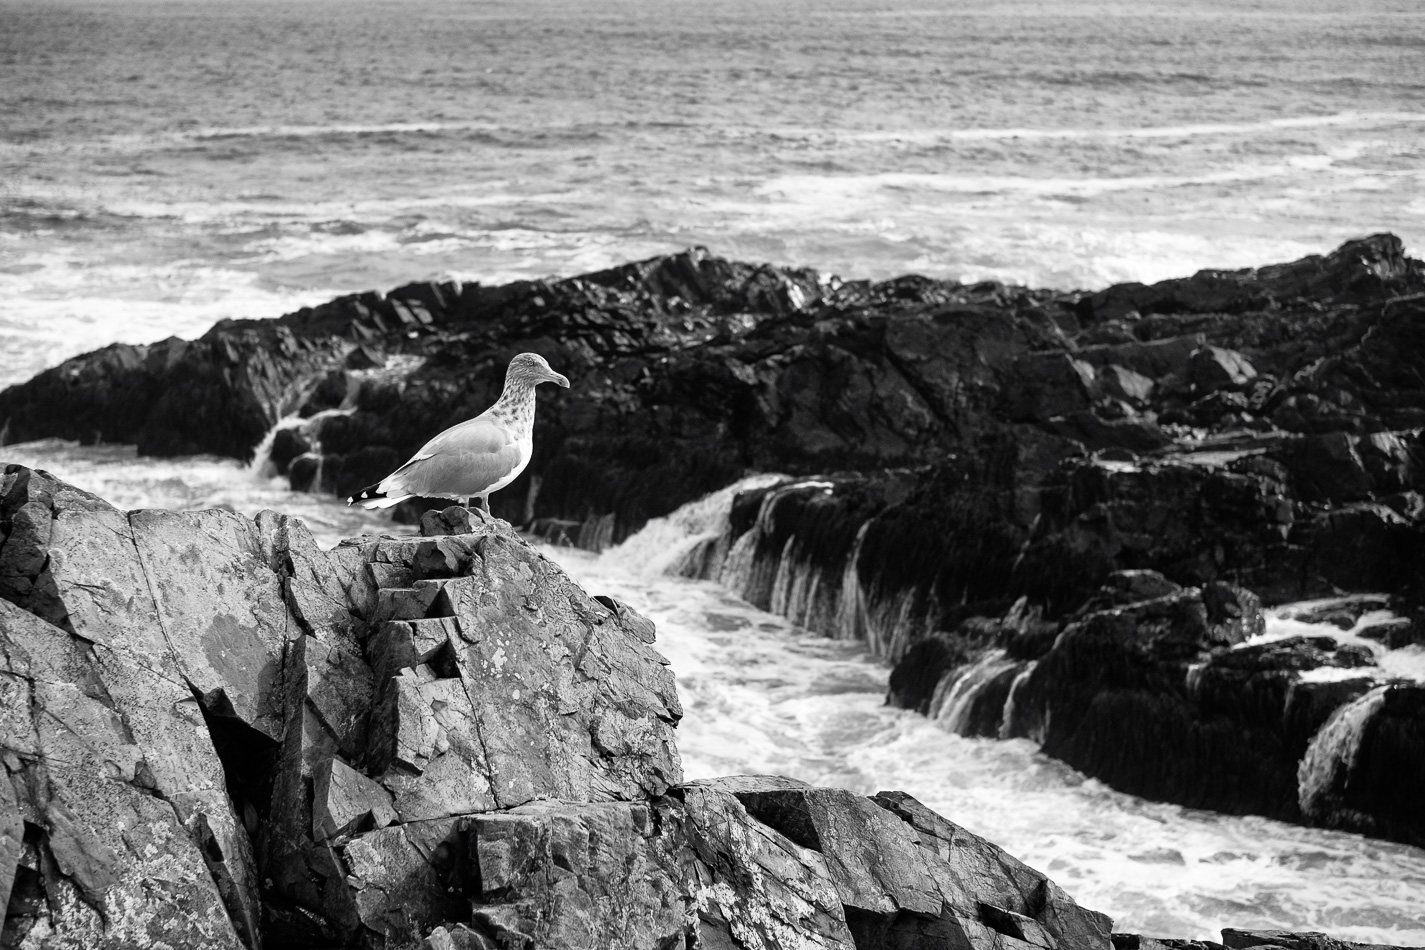 Black and white photo of a lone seagull standing on some large rocks